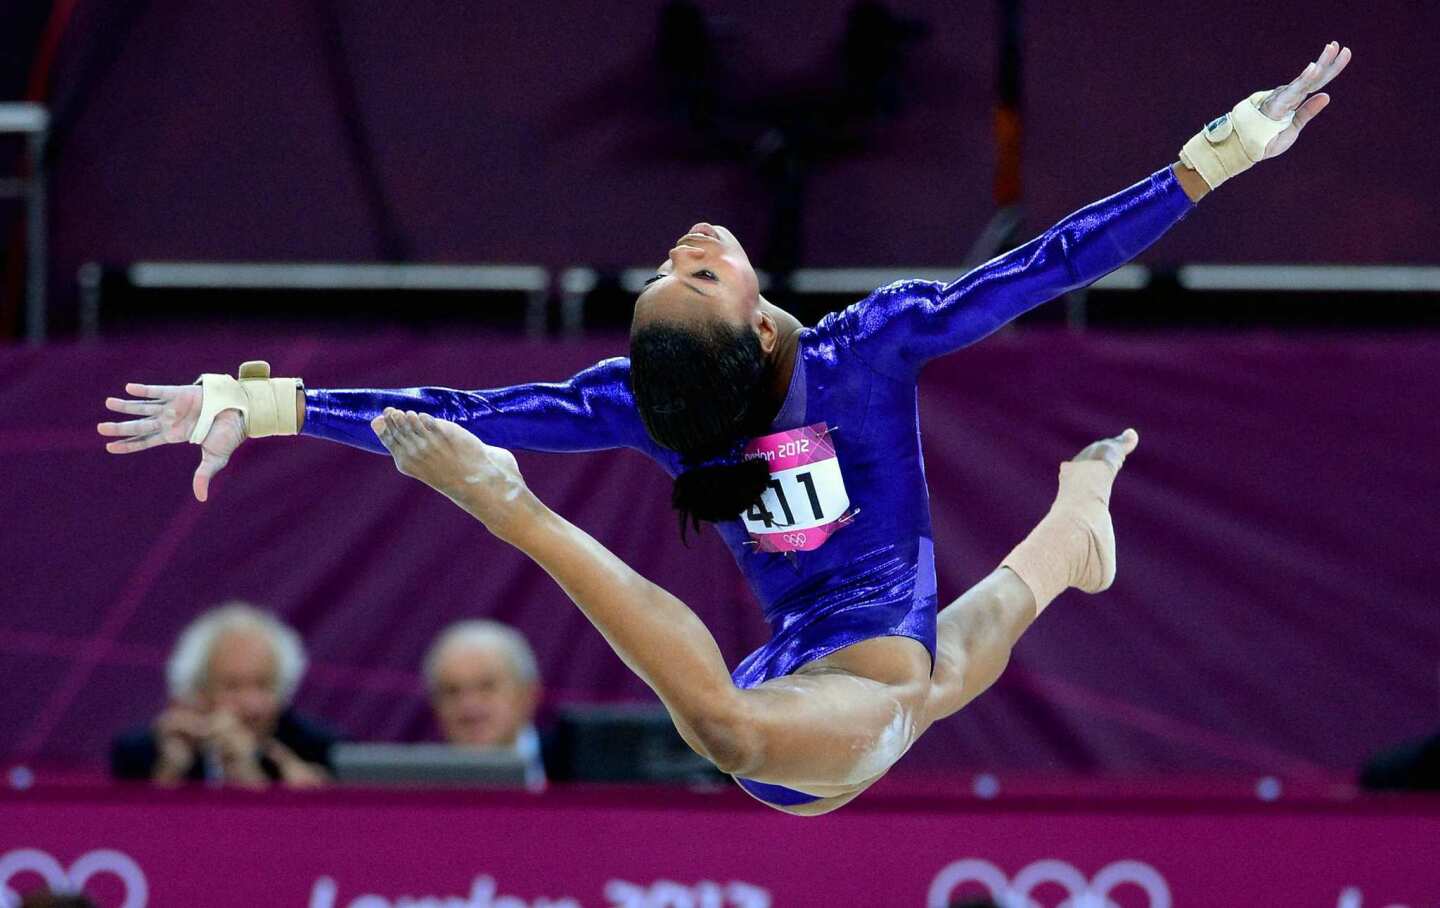 Gabrielle Douglas competes in the women's individual qualification.